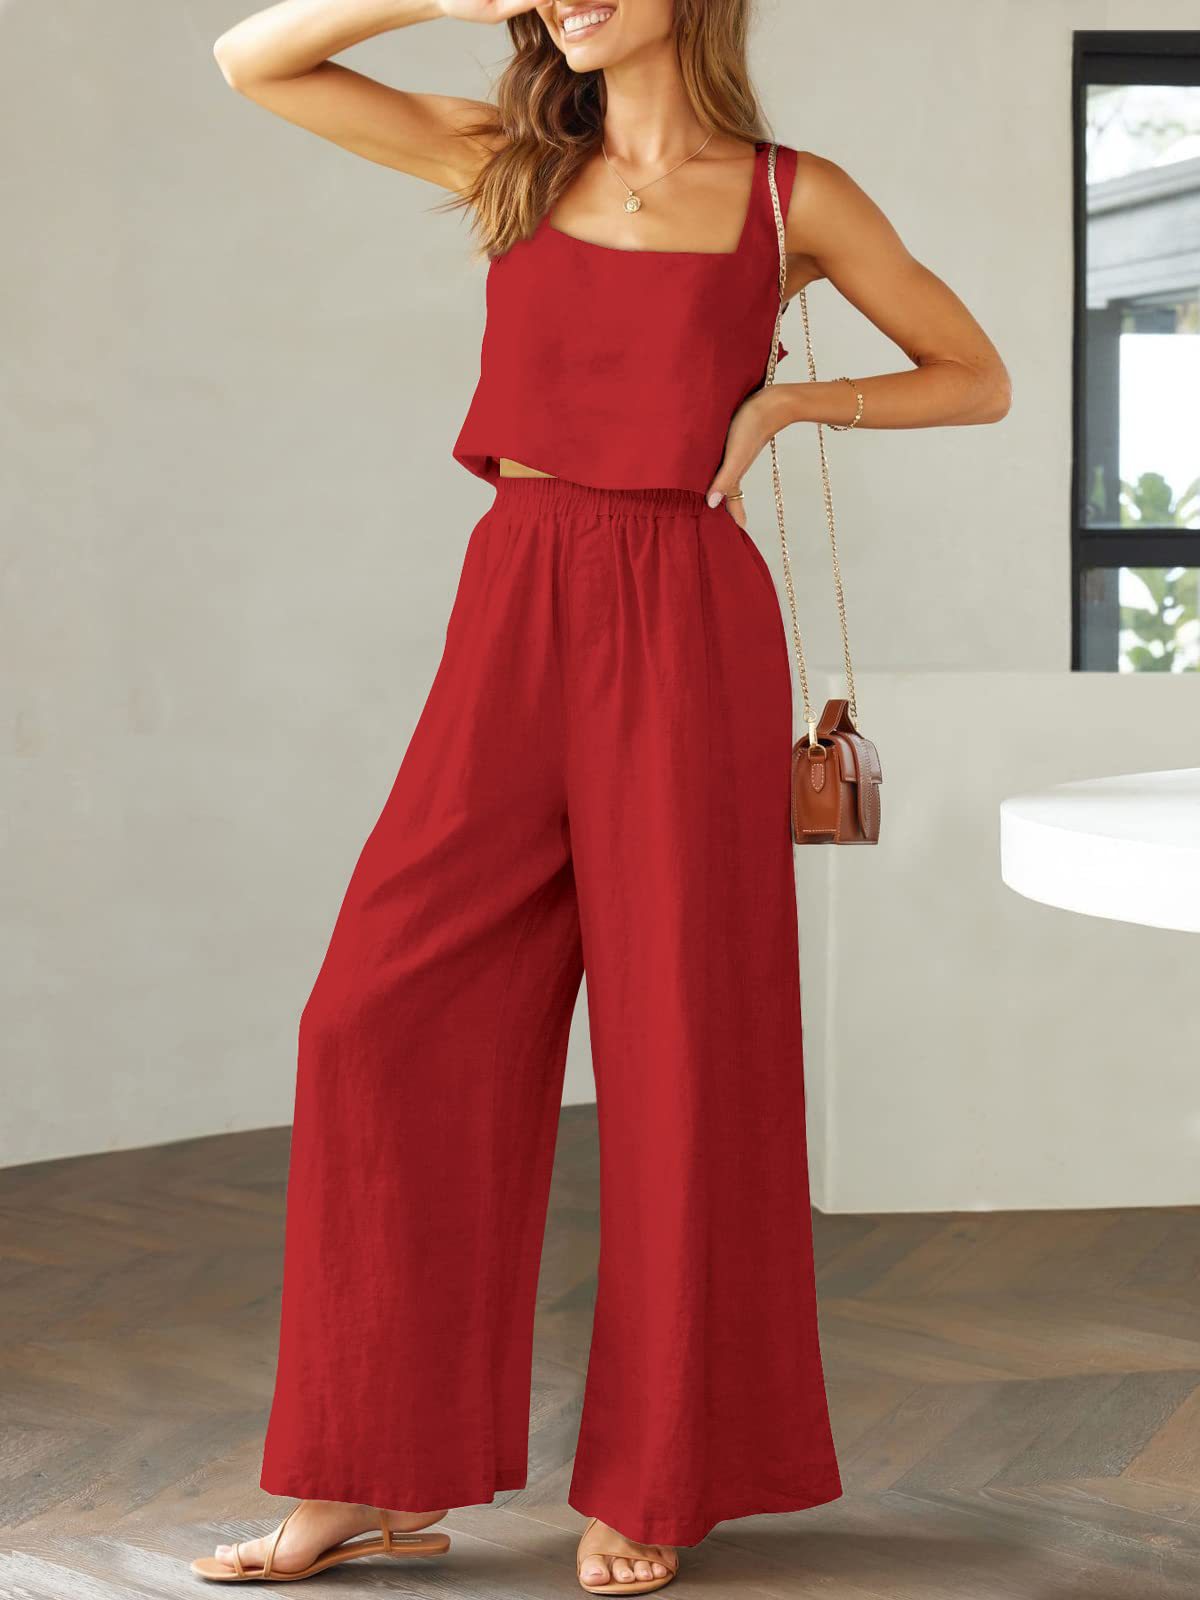 NTG Fad SUIT Red / S Cotton linen sleeveless camisole wide-leg trousers casual suit